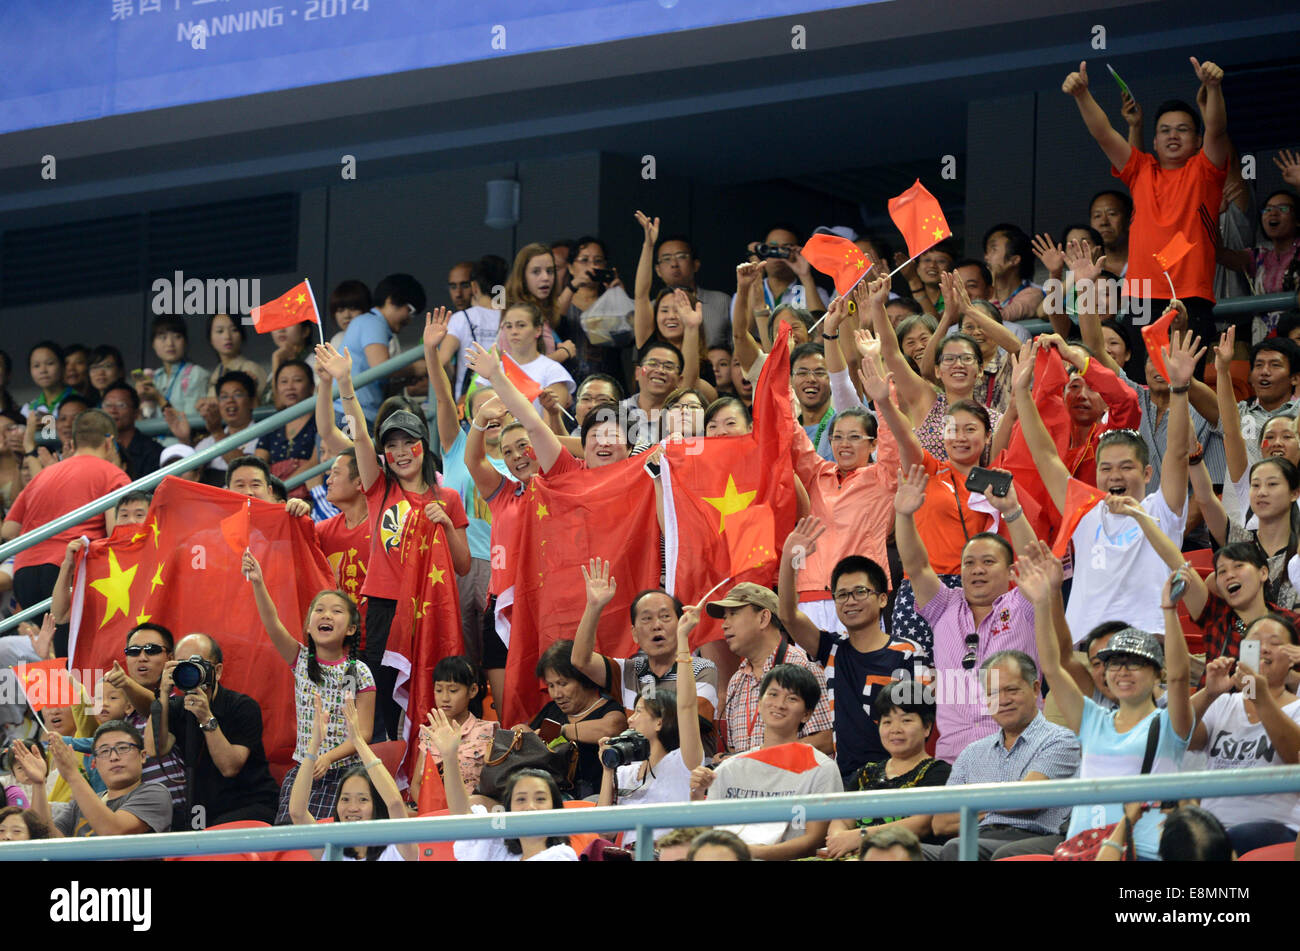 Nanning, China's Guangxi Zhuang Autonomous Region. 11th Oct, 2014. Chinese spectators display national flags of China during the individual apparatus finals of the 45th Gymnastics World Championships in Nanning, capital of south China's Guangxi Zhuang Autonomous Region, Oct. 11, 2014. Credit:  Wang Yuguo/Xinhua/Alamy Live News Stock Photo